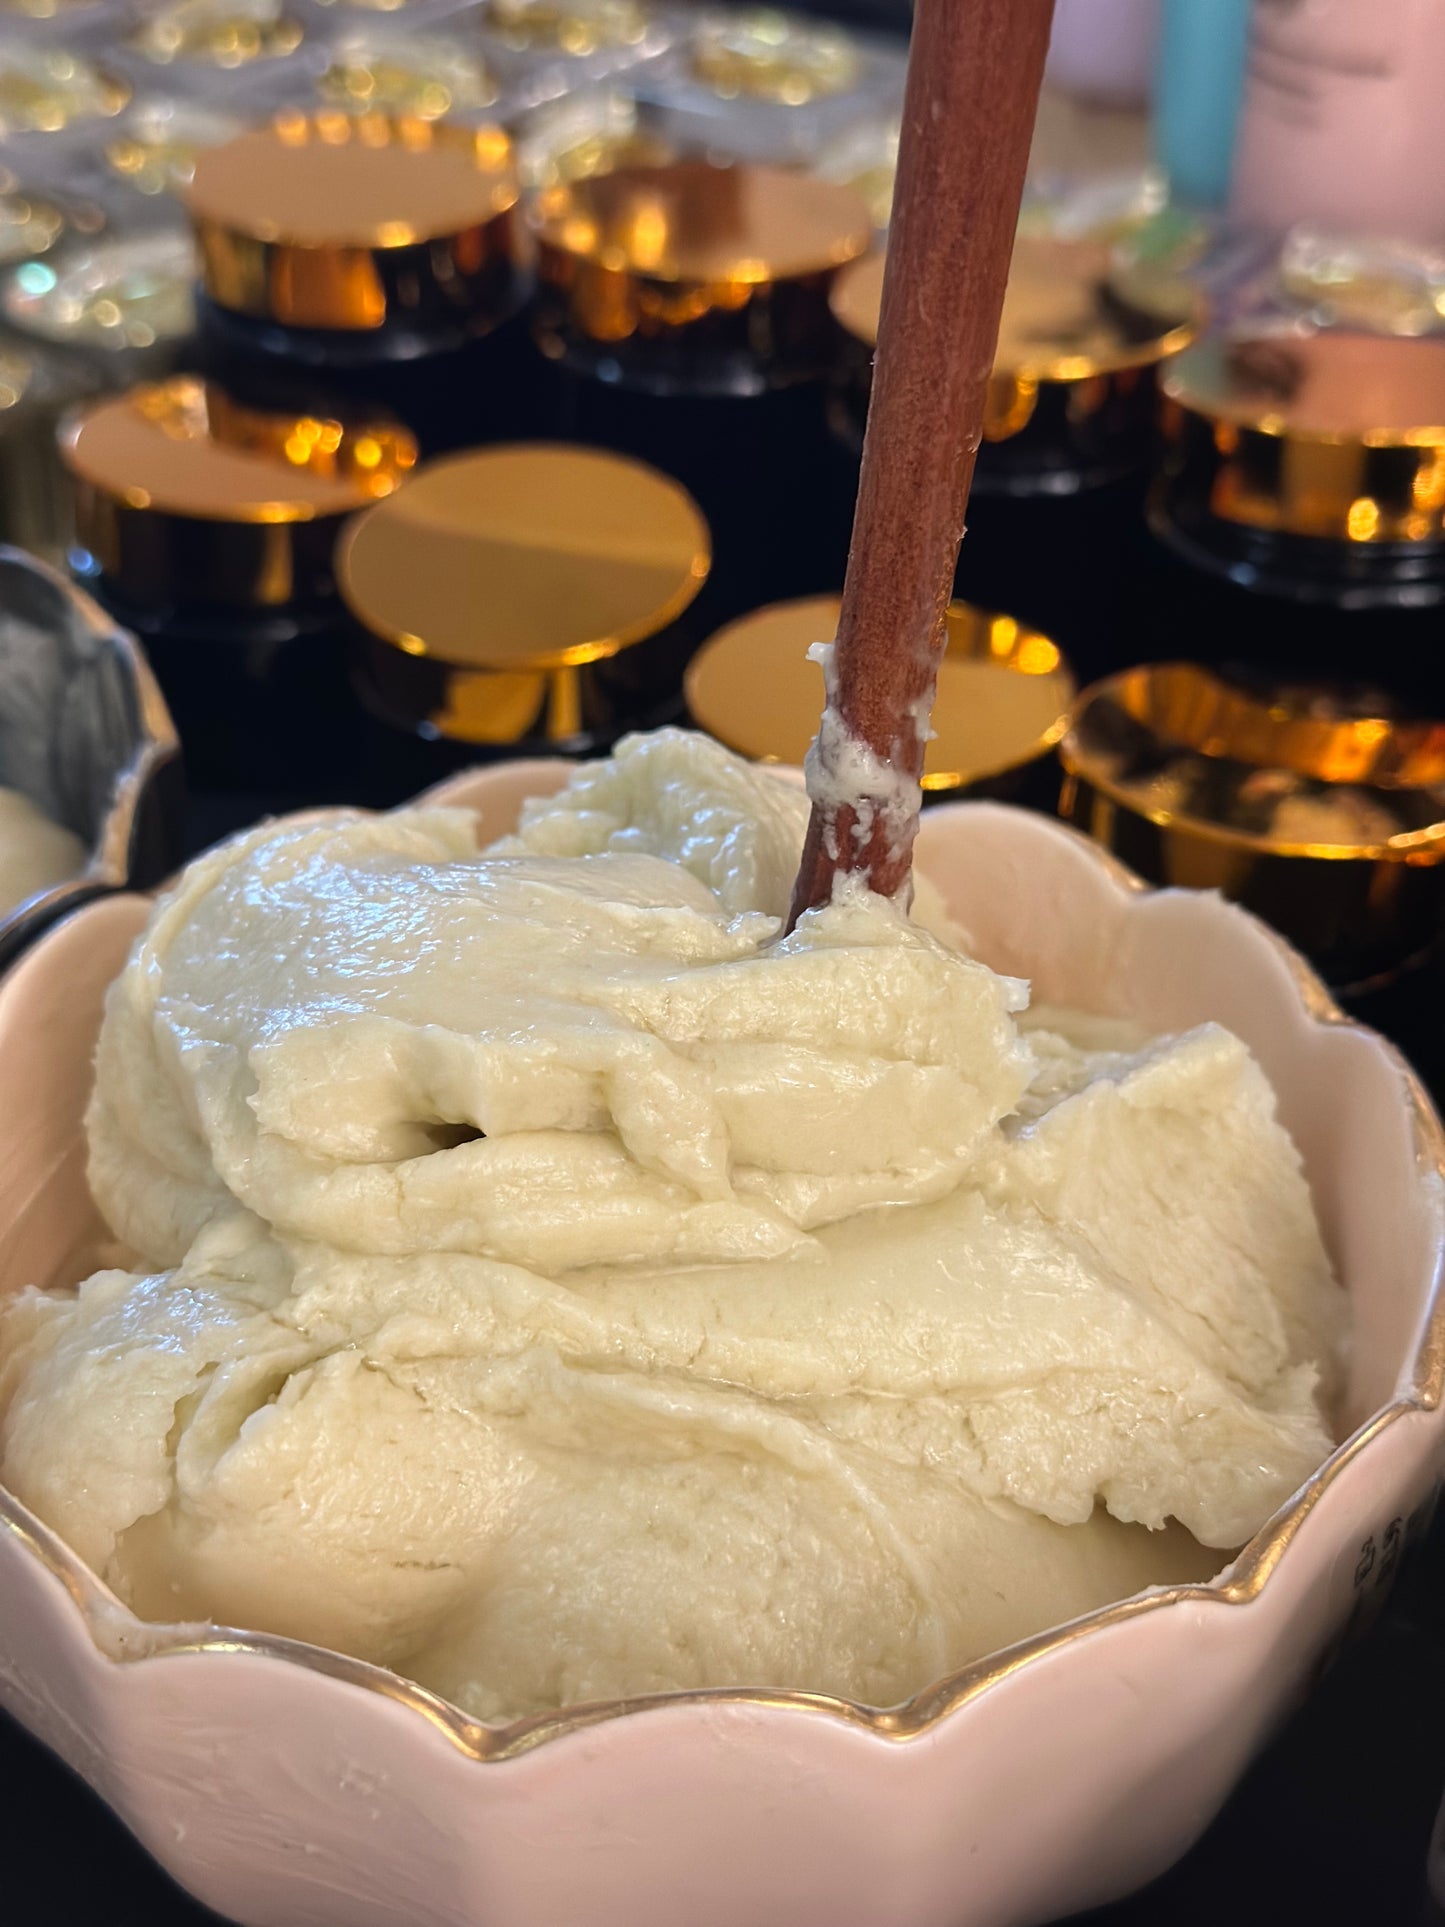 Shea Butter for the body